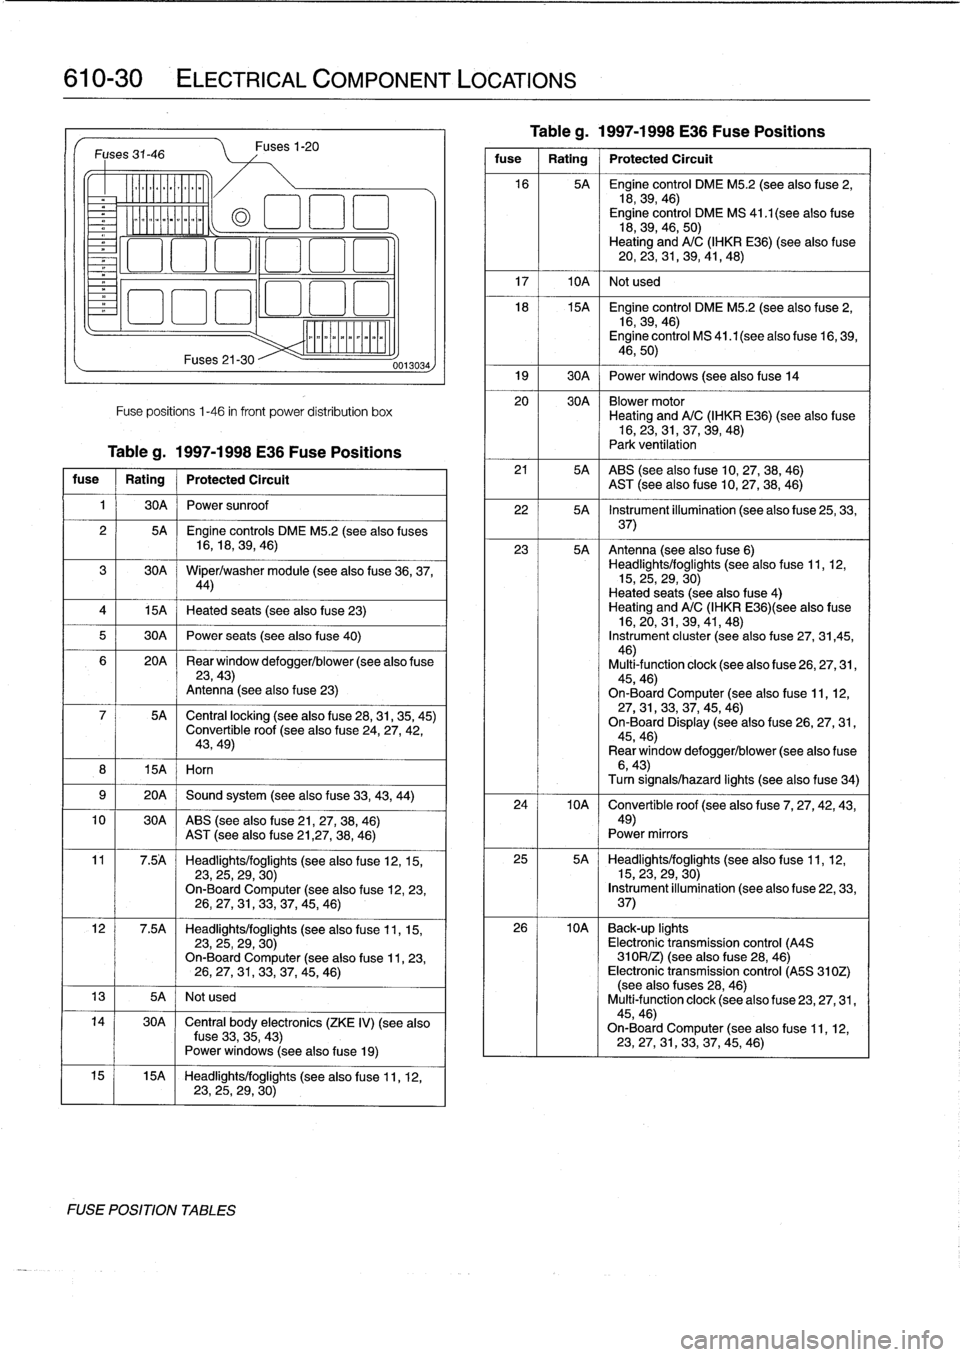 BMW 328i 1998 E36 Workshop Manual 
610-30

	

ELECTRICAL
COMPONENT
LOCATIONS

Fuses
31-46

v

--------------

15A
I
Horn
Fuses21-30

Fuses
1-20

Fuse
positions
1-46
in
front
power
distribution
box

Tableg
.
1997-1998
E36
Fuse
Position